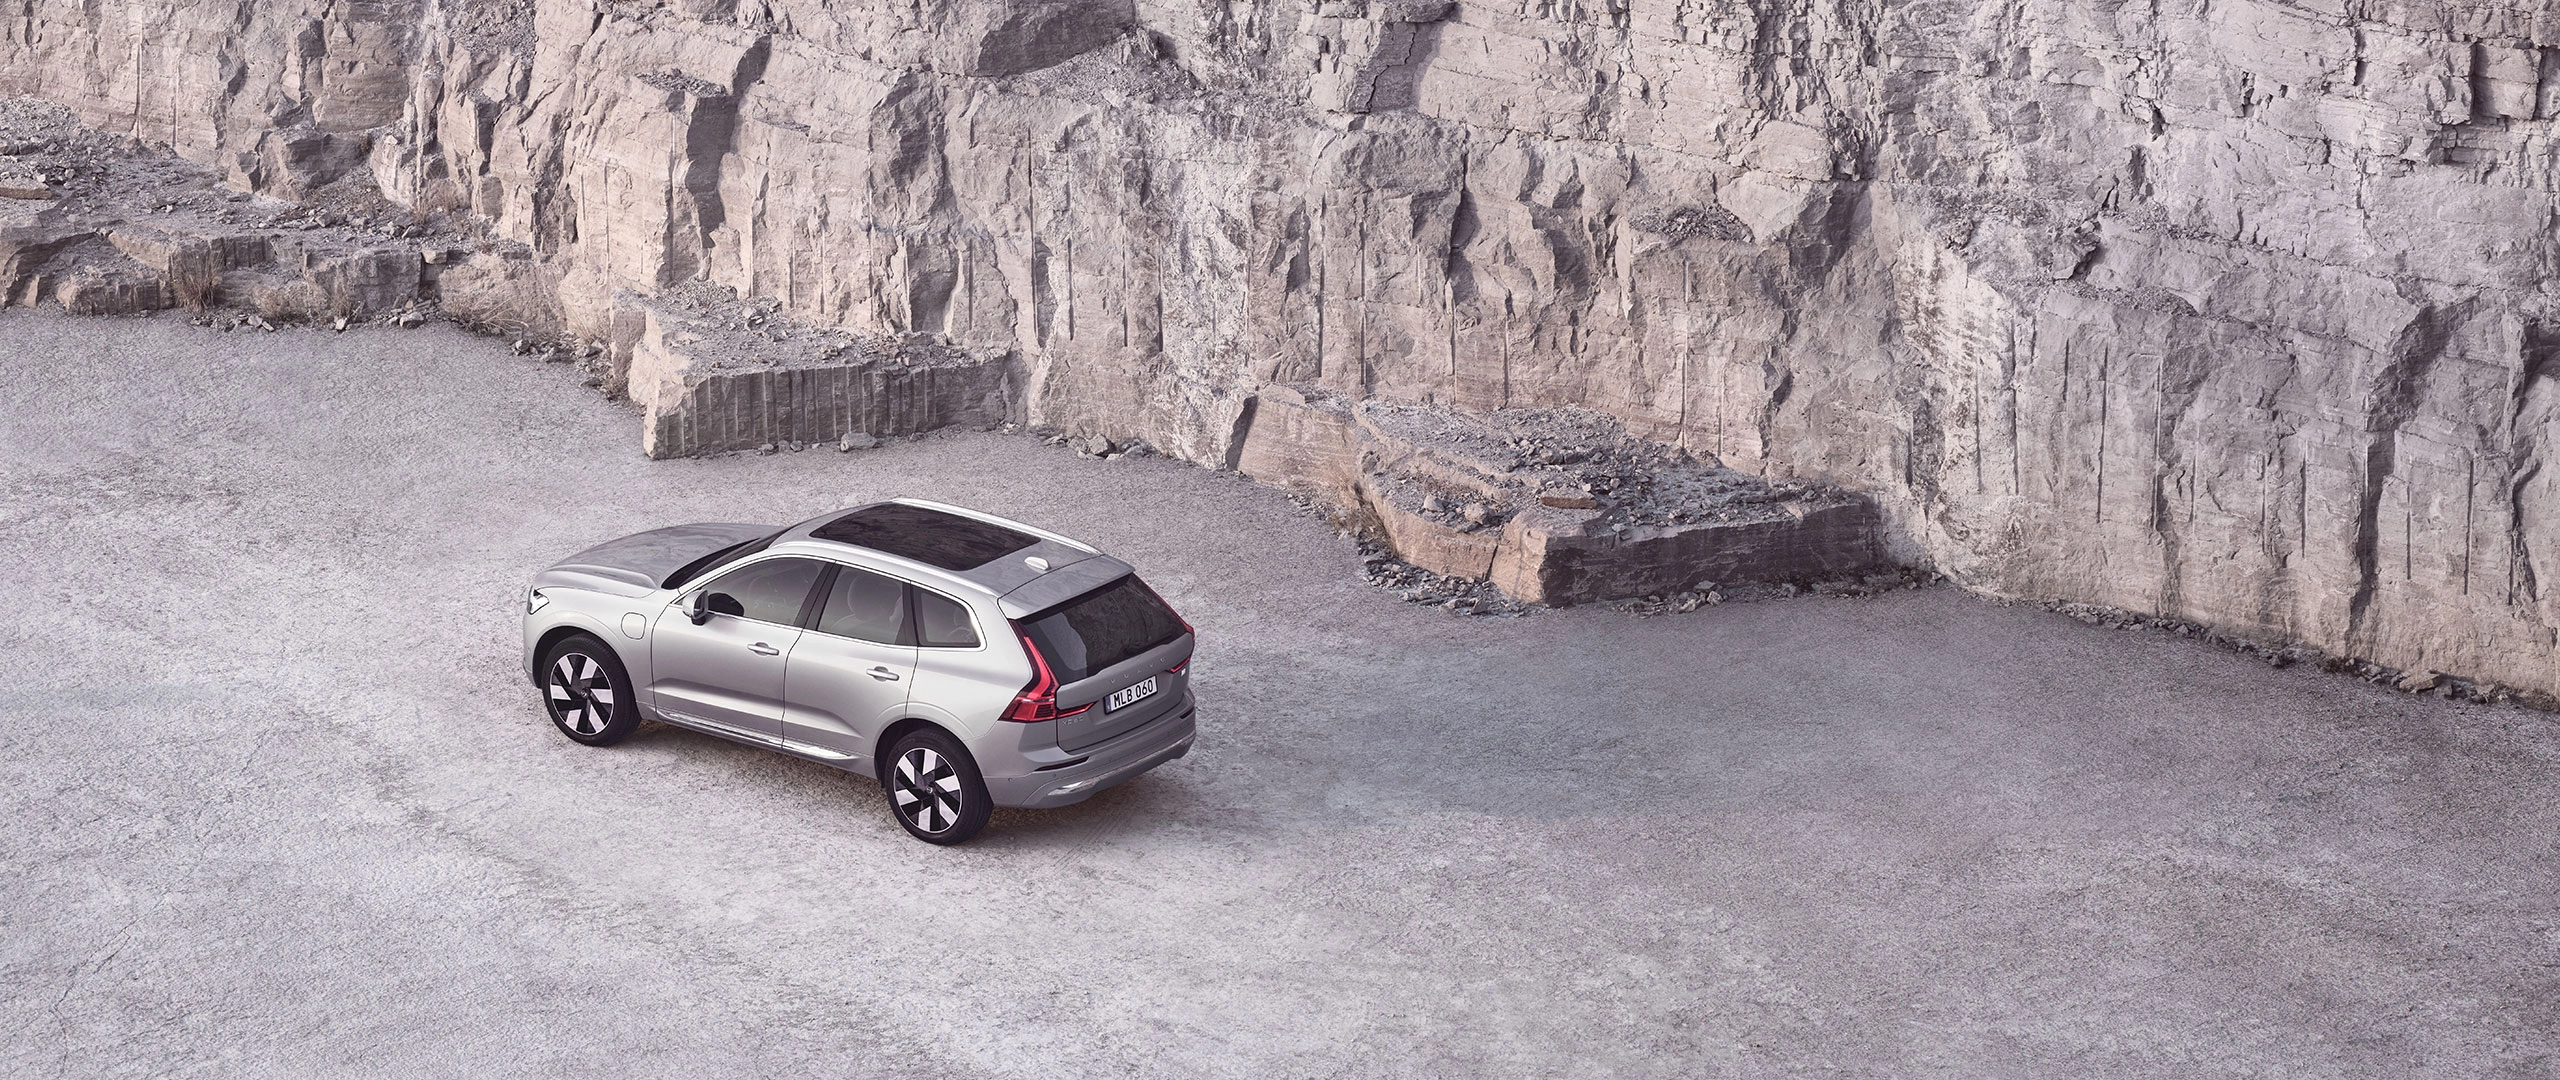 An aerial shot of a Volvo SUV car in a rocky outdoor environment